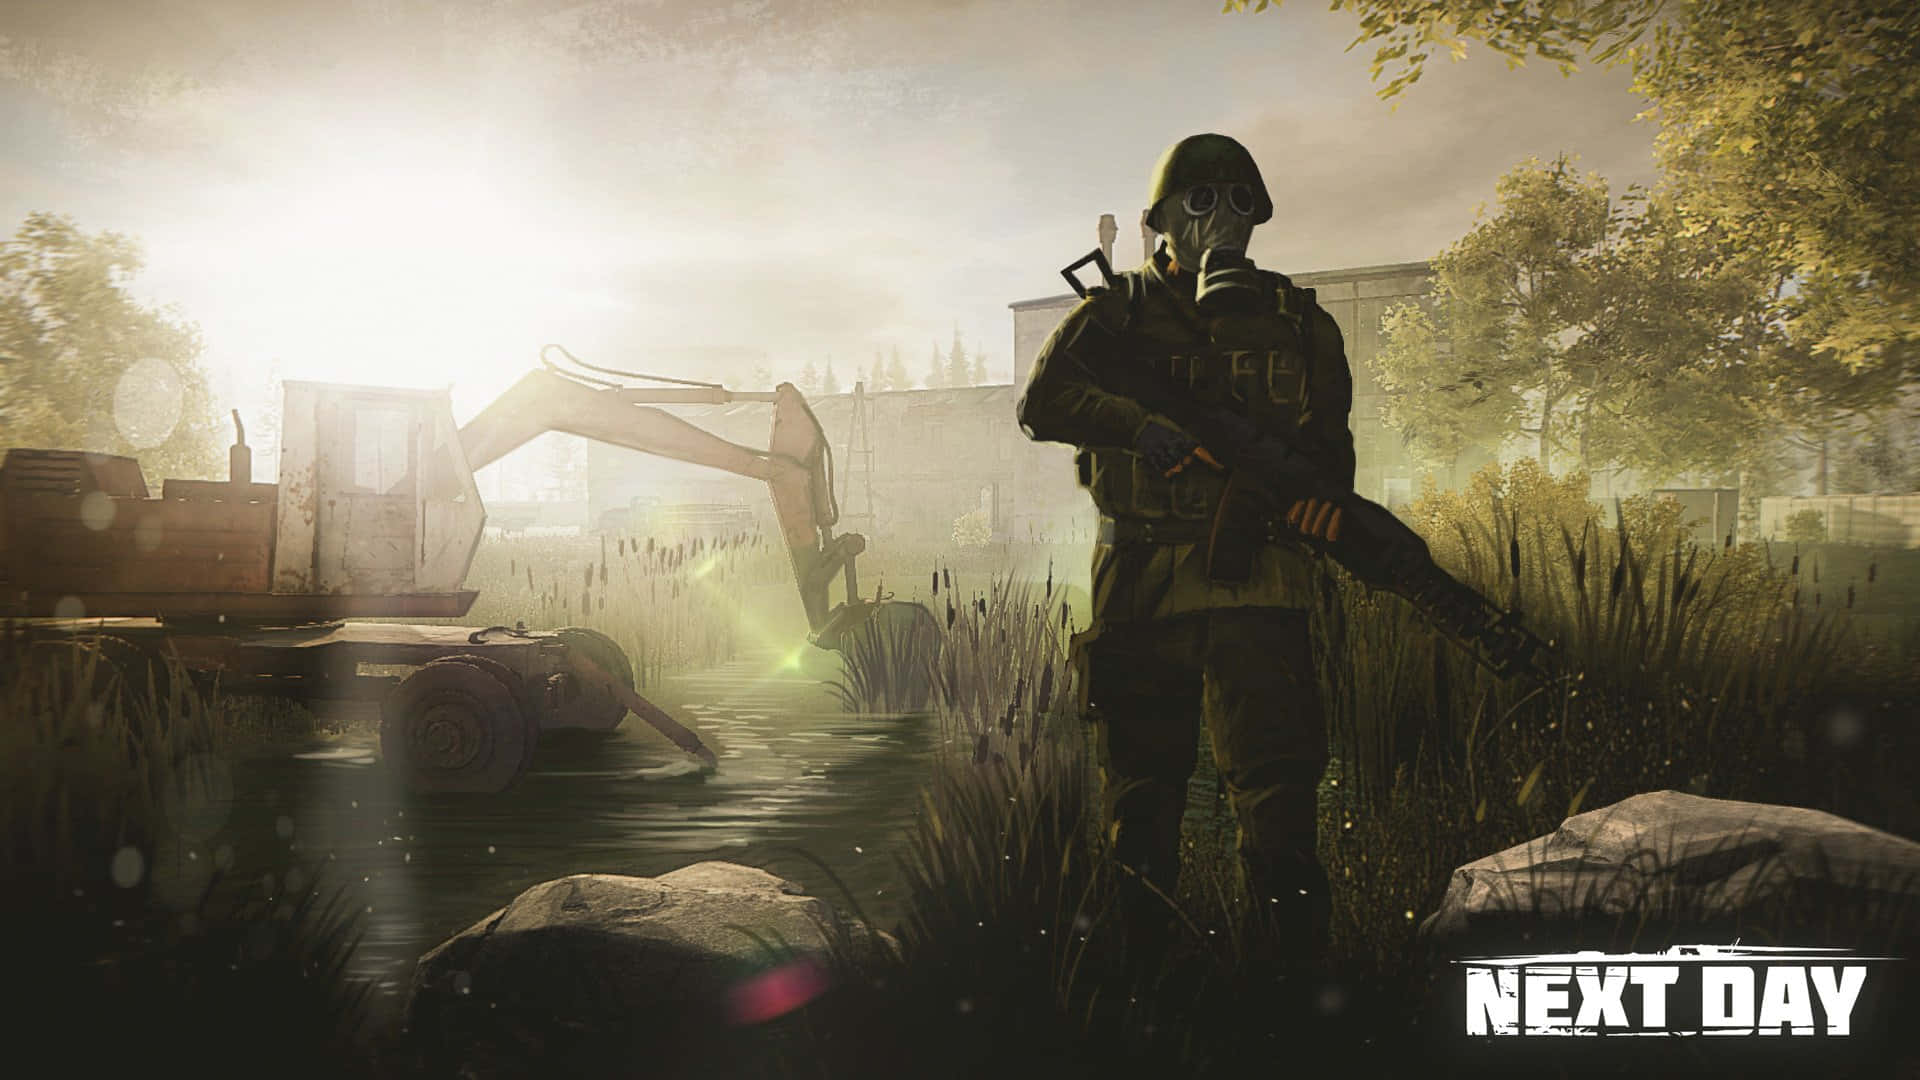 Play to Survive: Search and battle through the world of Survival Game Wallpaper